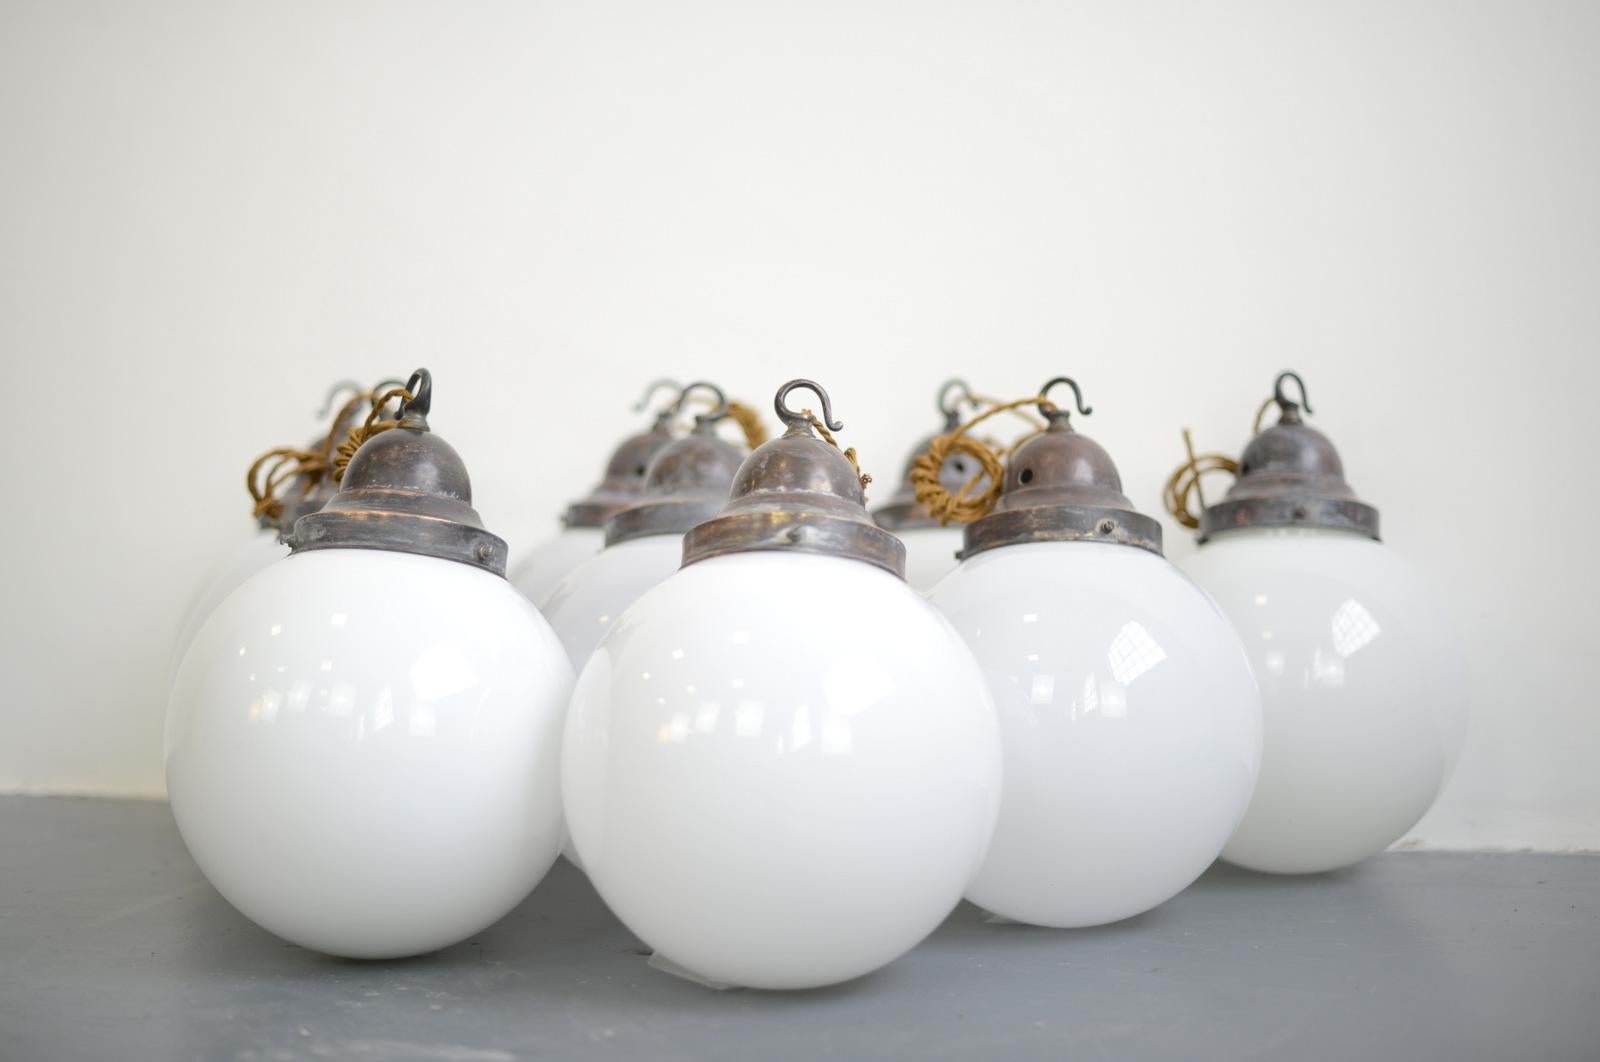 Opaline globe pendant lights, circa 1930s

- Price is per light
- White opaline glass
- Copper galleries
- Takes e27 fitting bulbs
- Comes with 100cm of gold braided cable
- 2 globes have slightly thicker glass
- German ~ 1930s
- 21cm wide